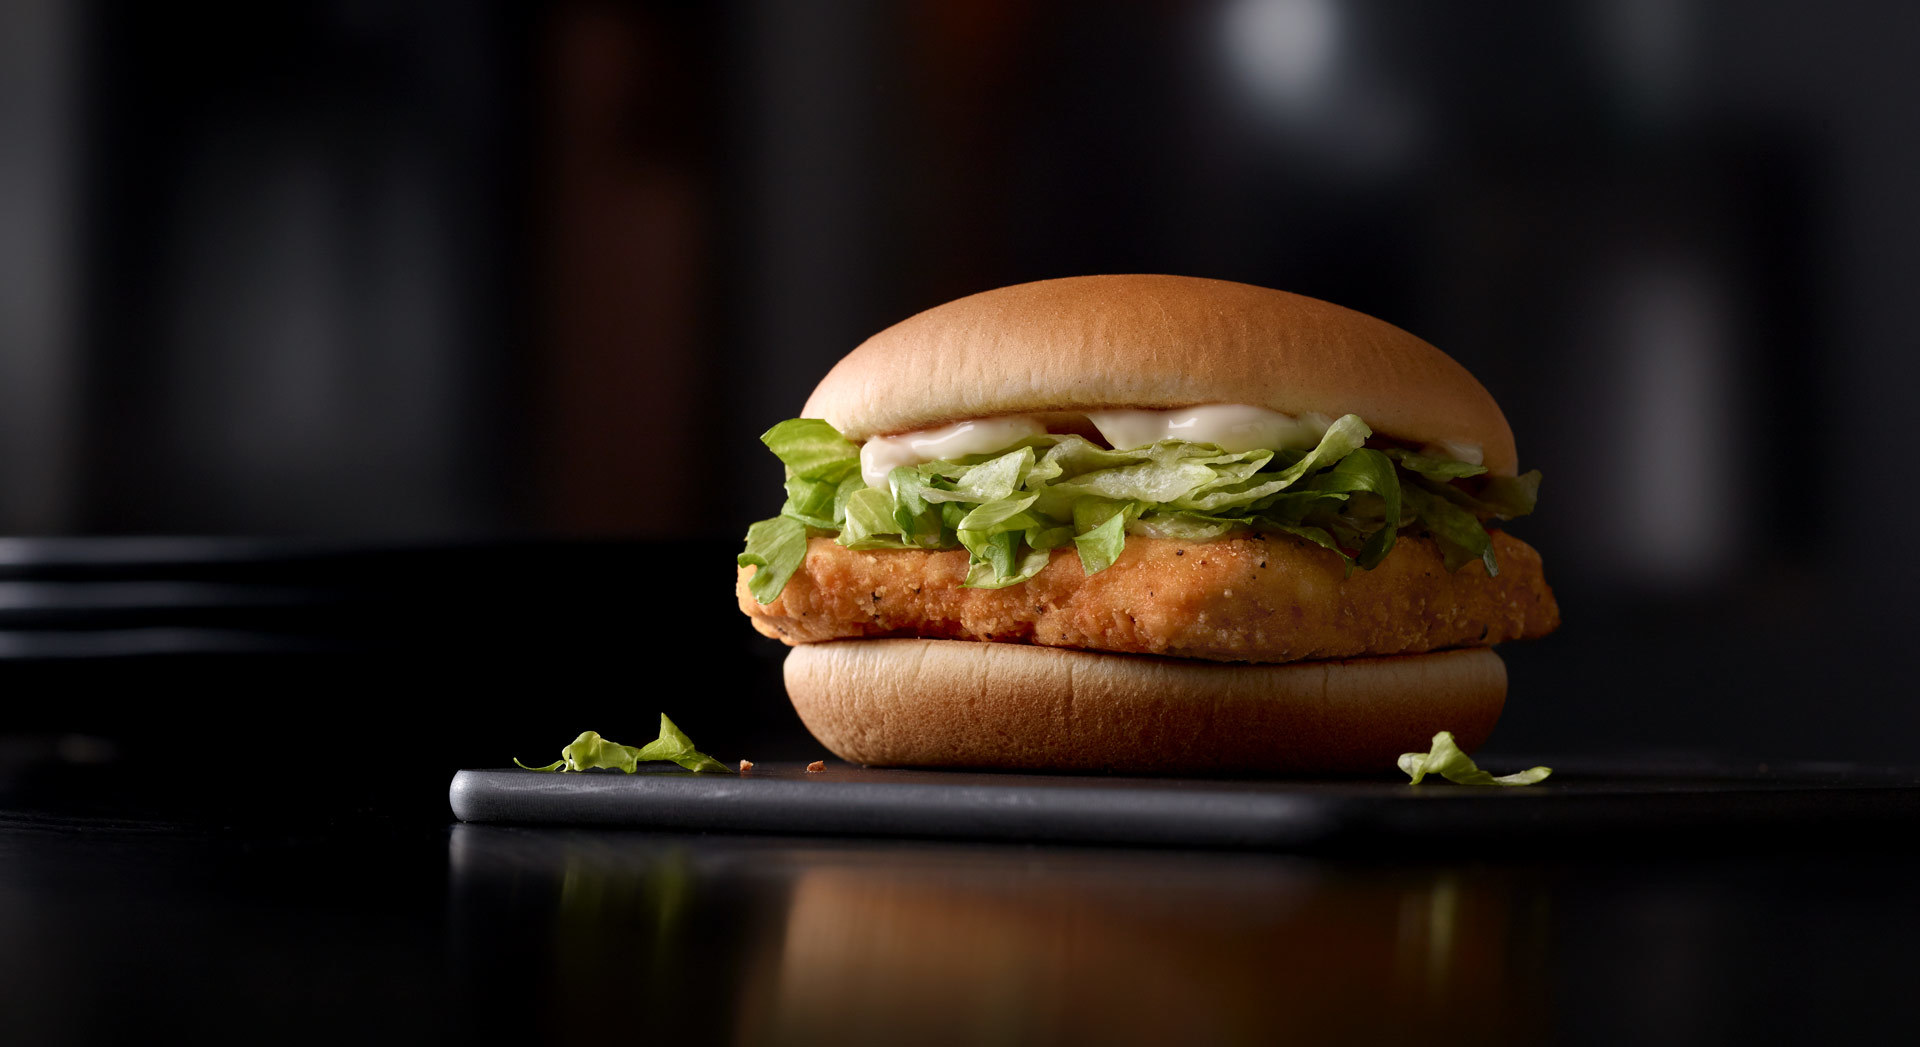 Do any of McDonald's burgers contain pork meat of any sort? - Know Our Food